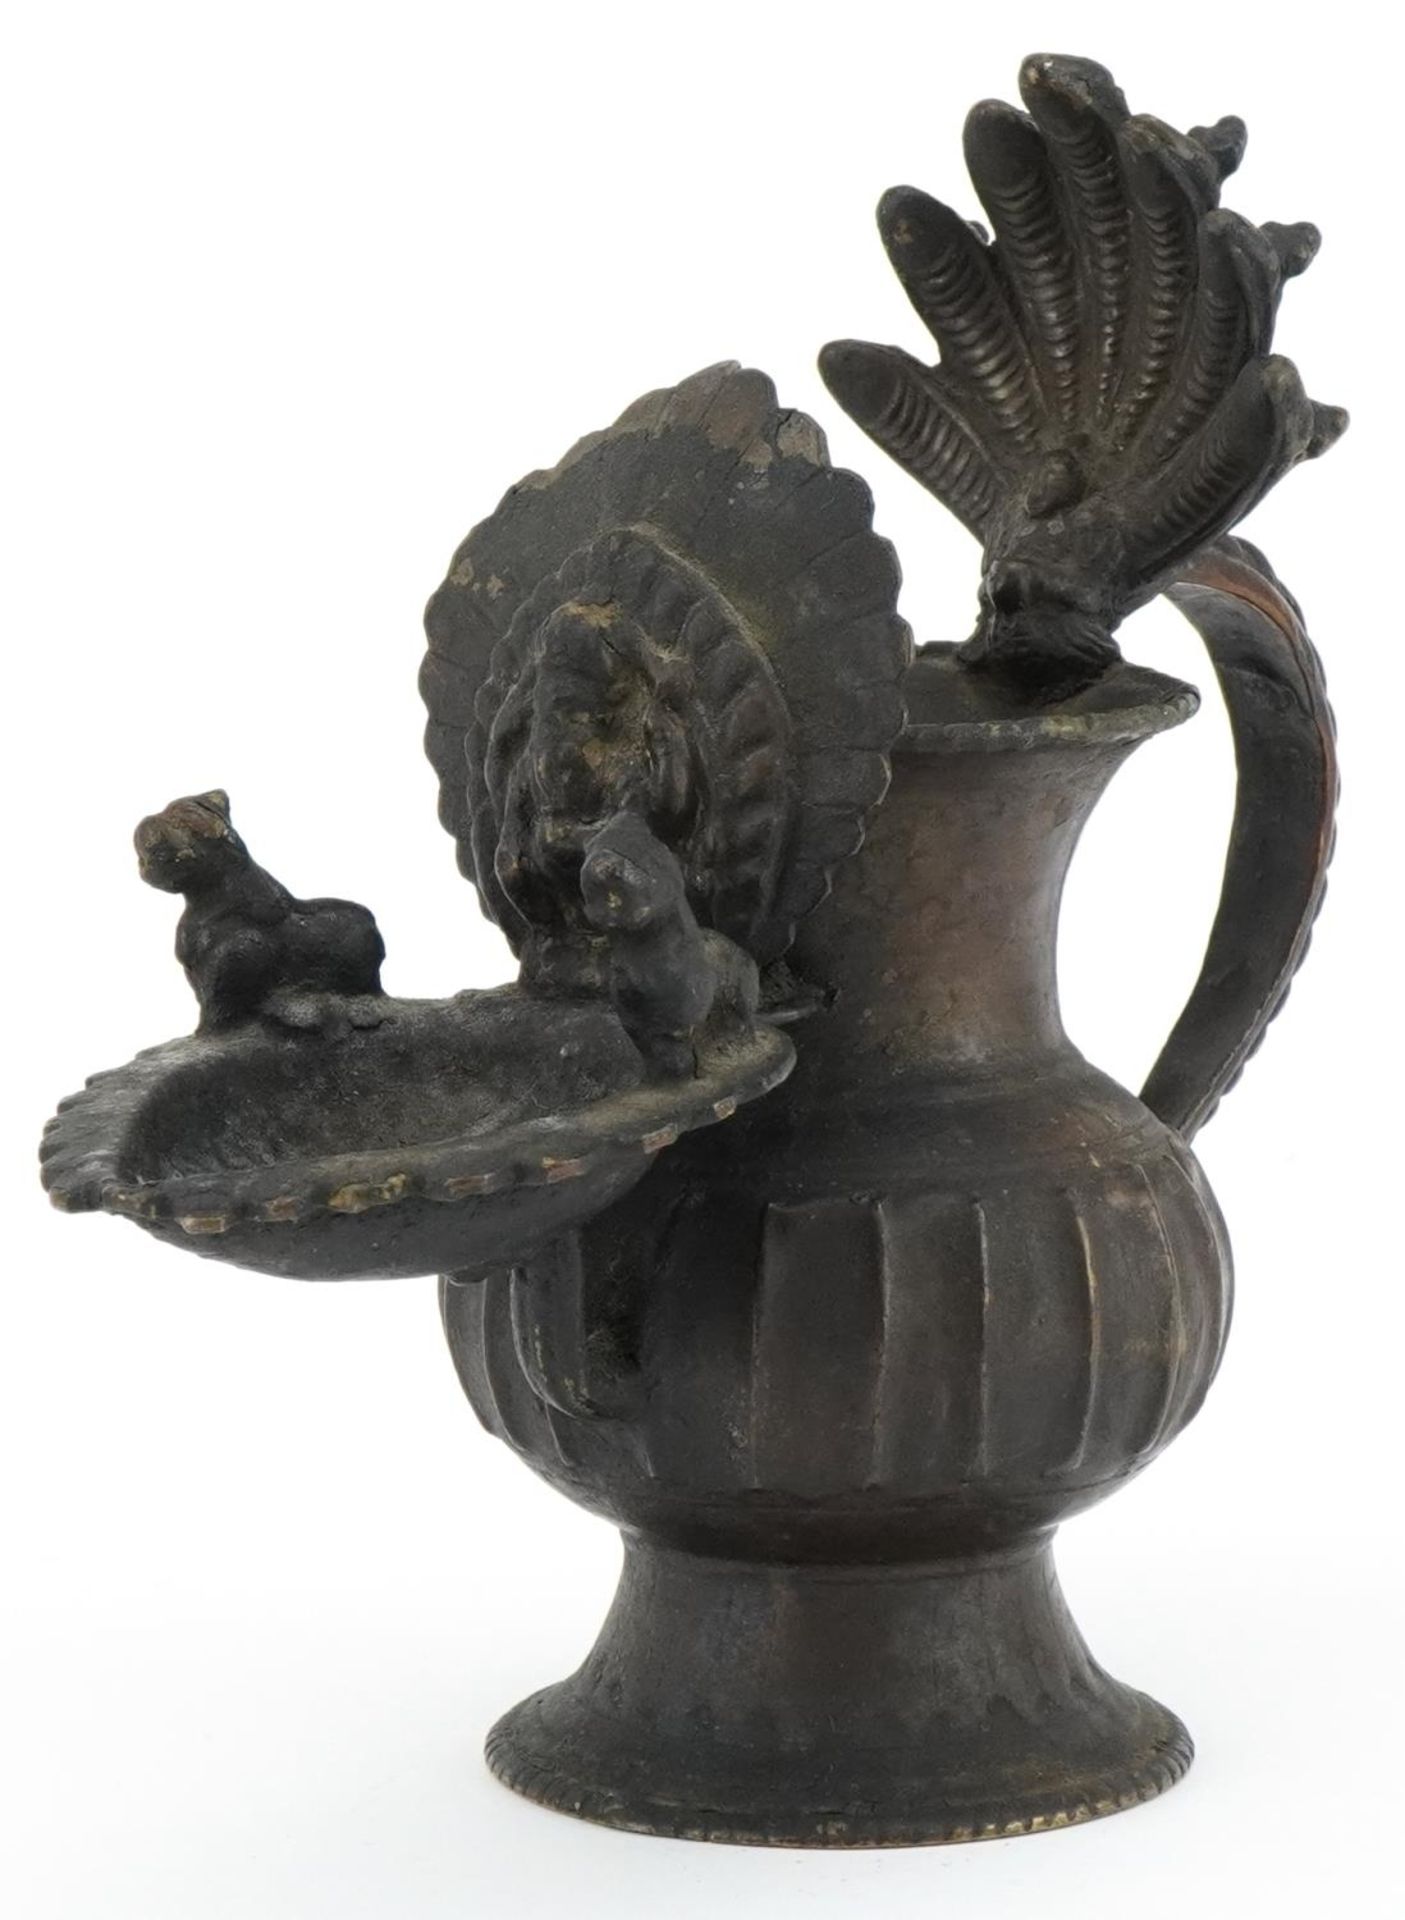 Antique Nepalese bronze oil lamp, 18cm high : For further information on this lot please visit www.